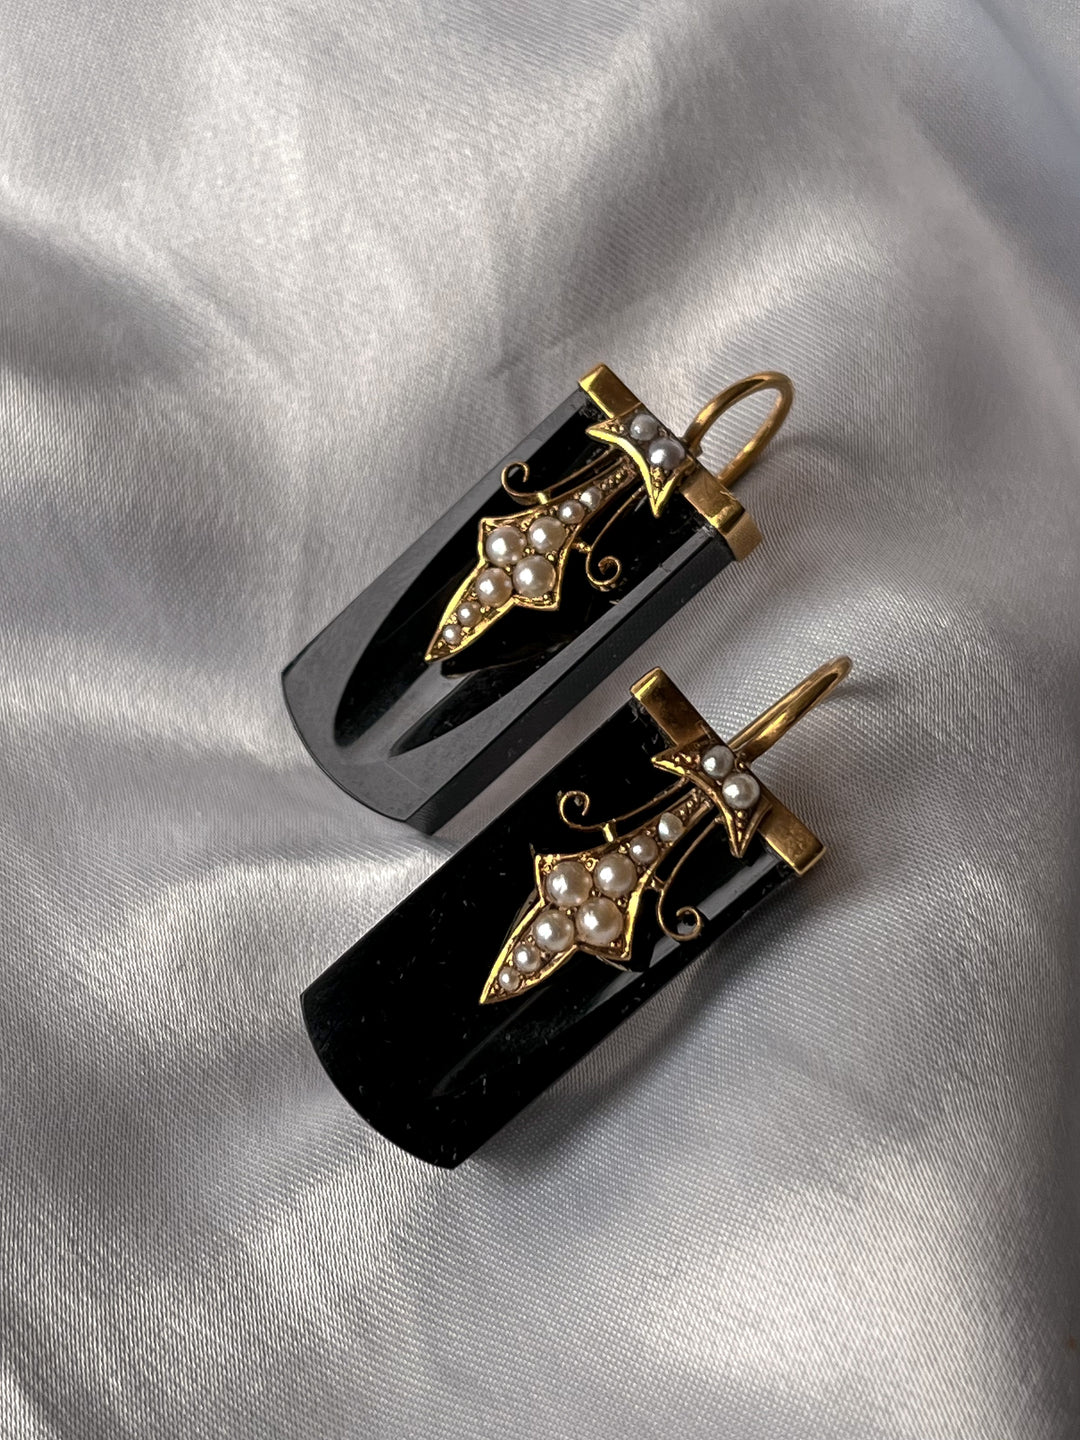 Gorgeous Onyx and Pearl Victorian Geometric Conversion Earrings